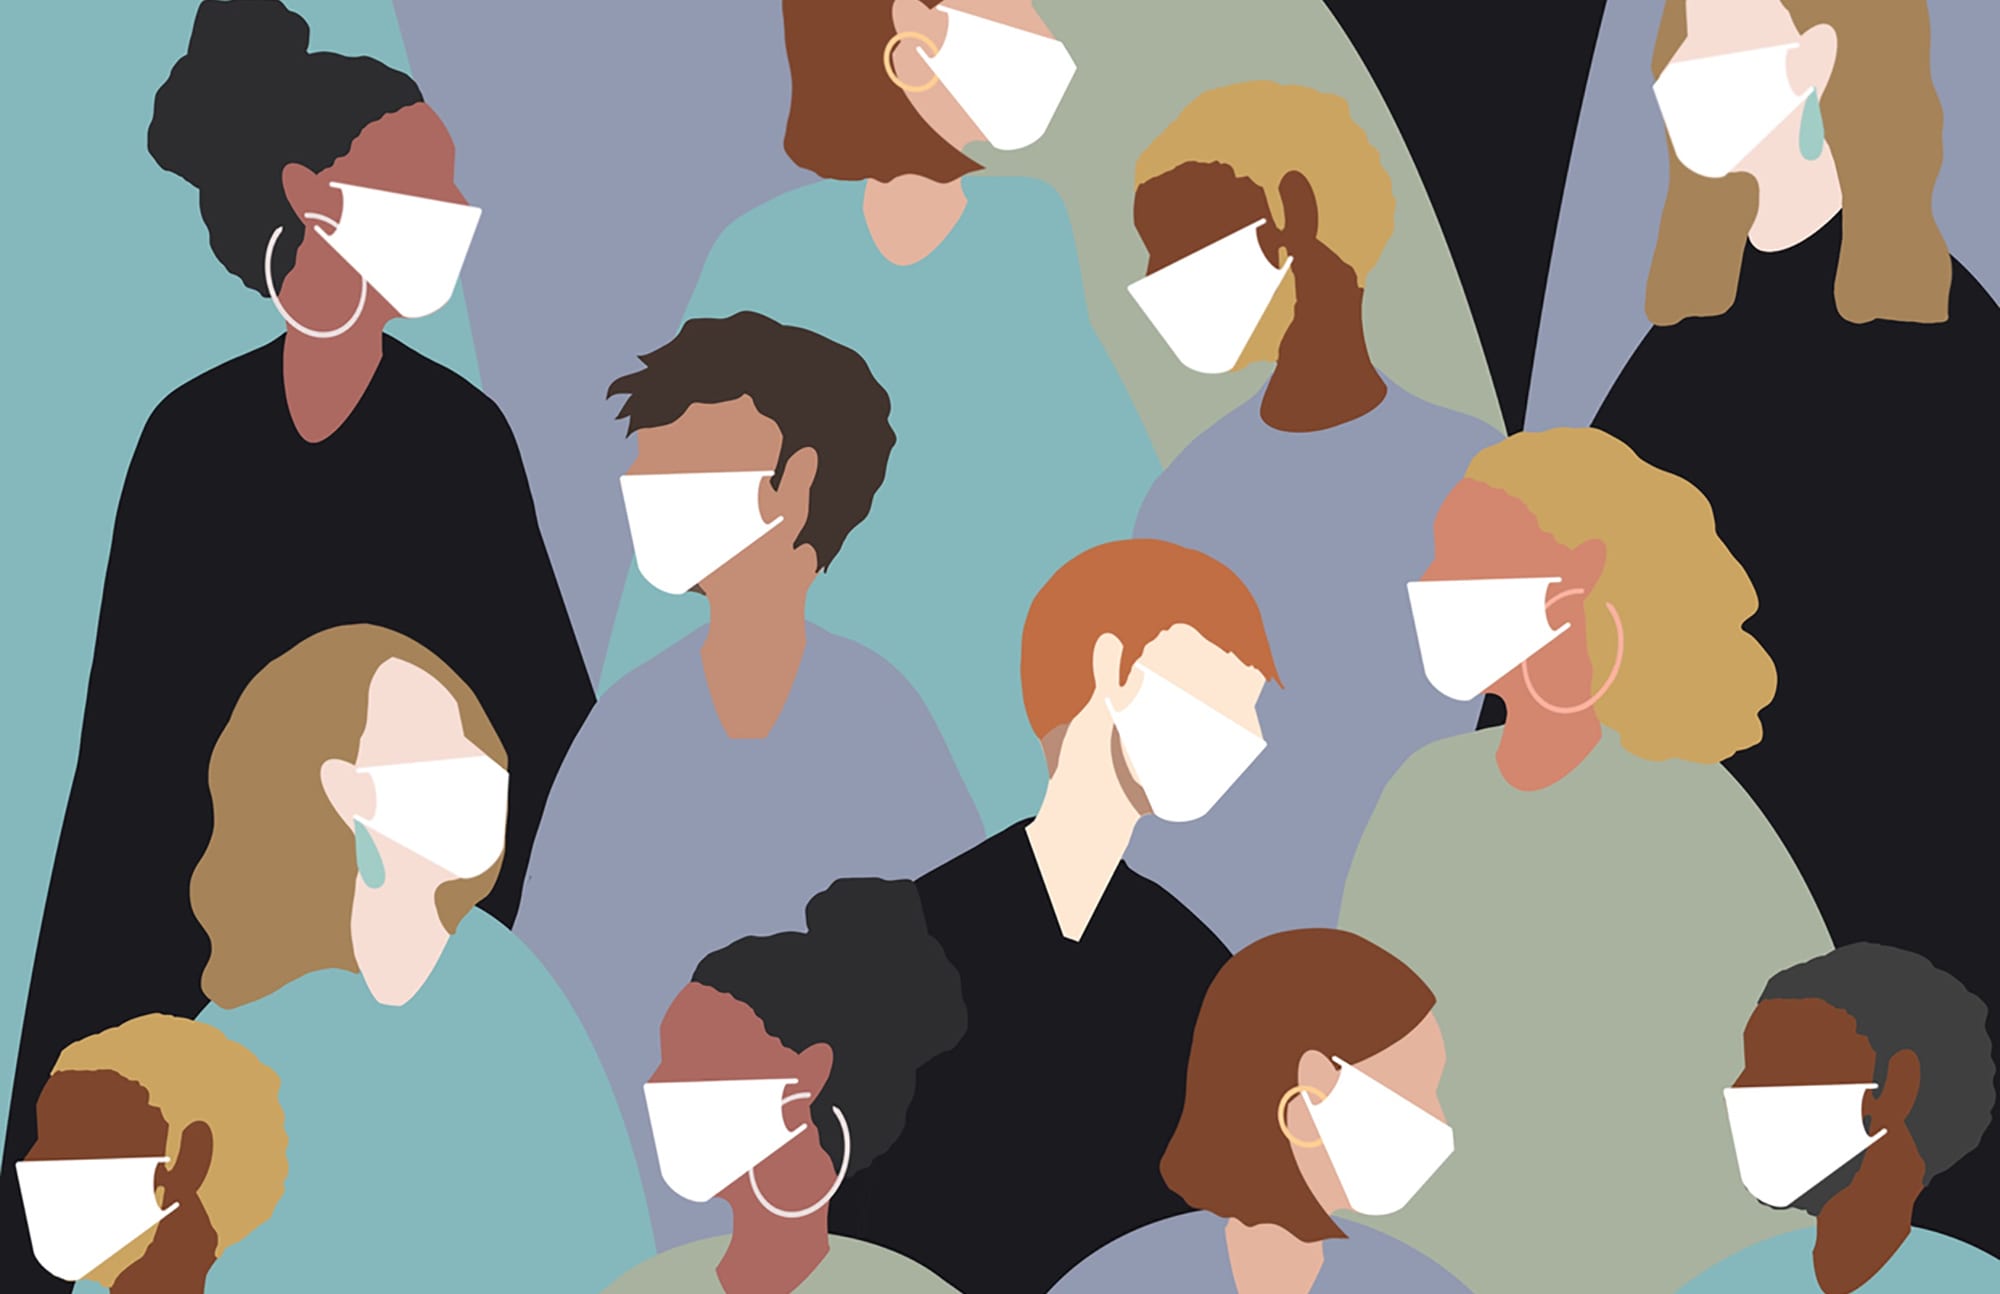 Illustration of a group of people wearing masks to prevent spreading illness